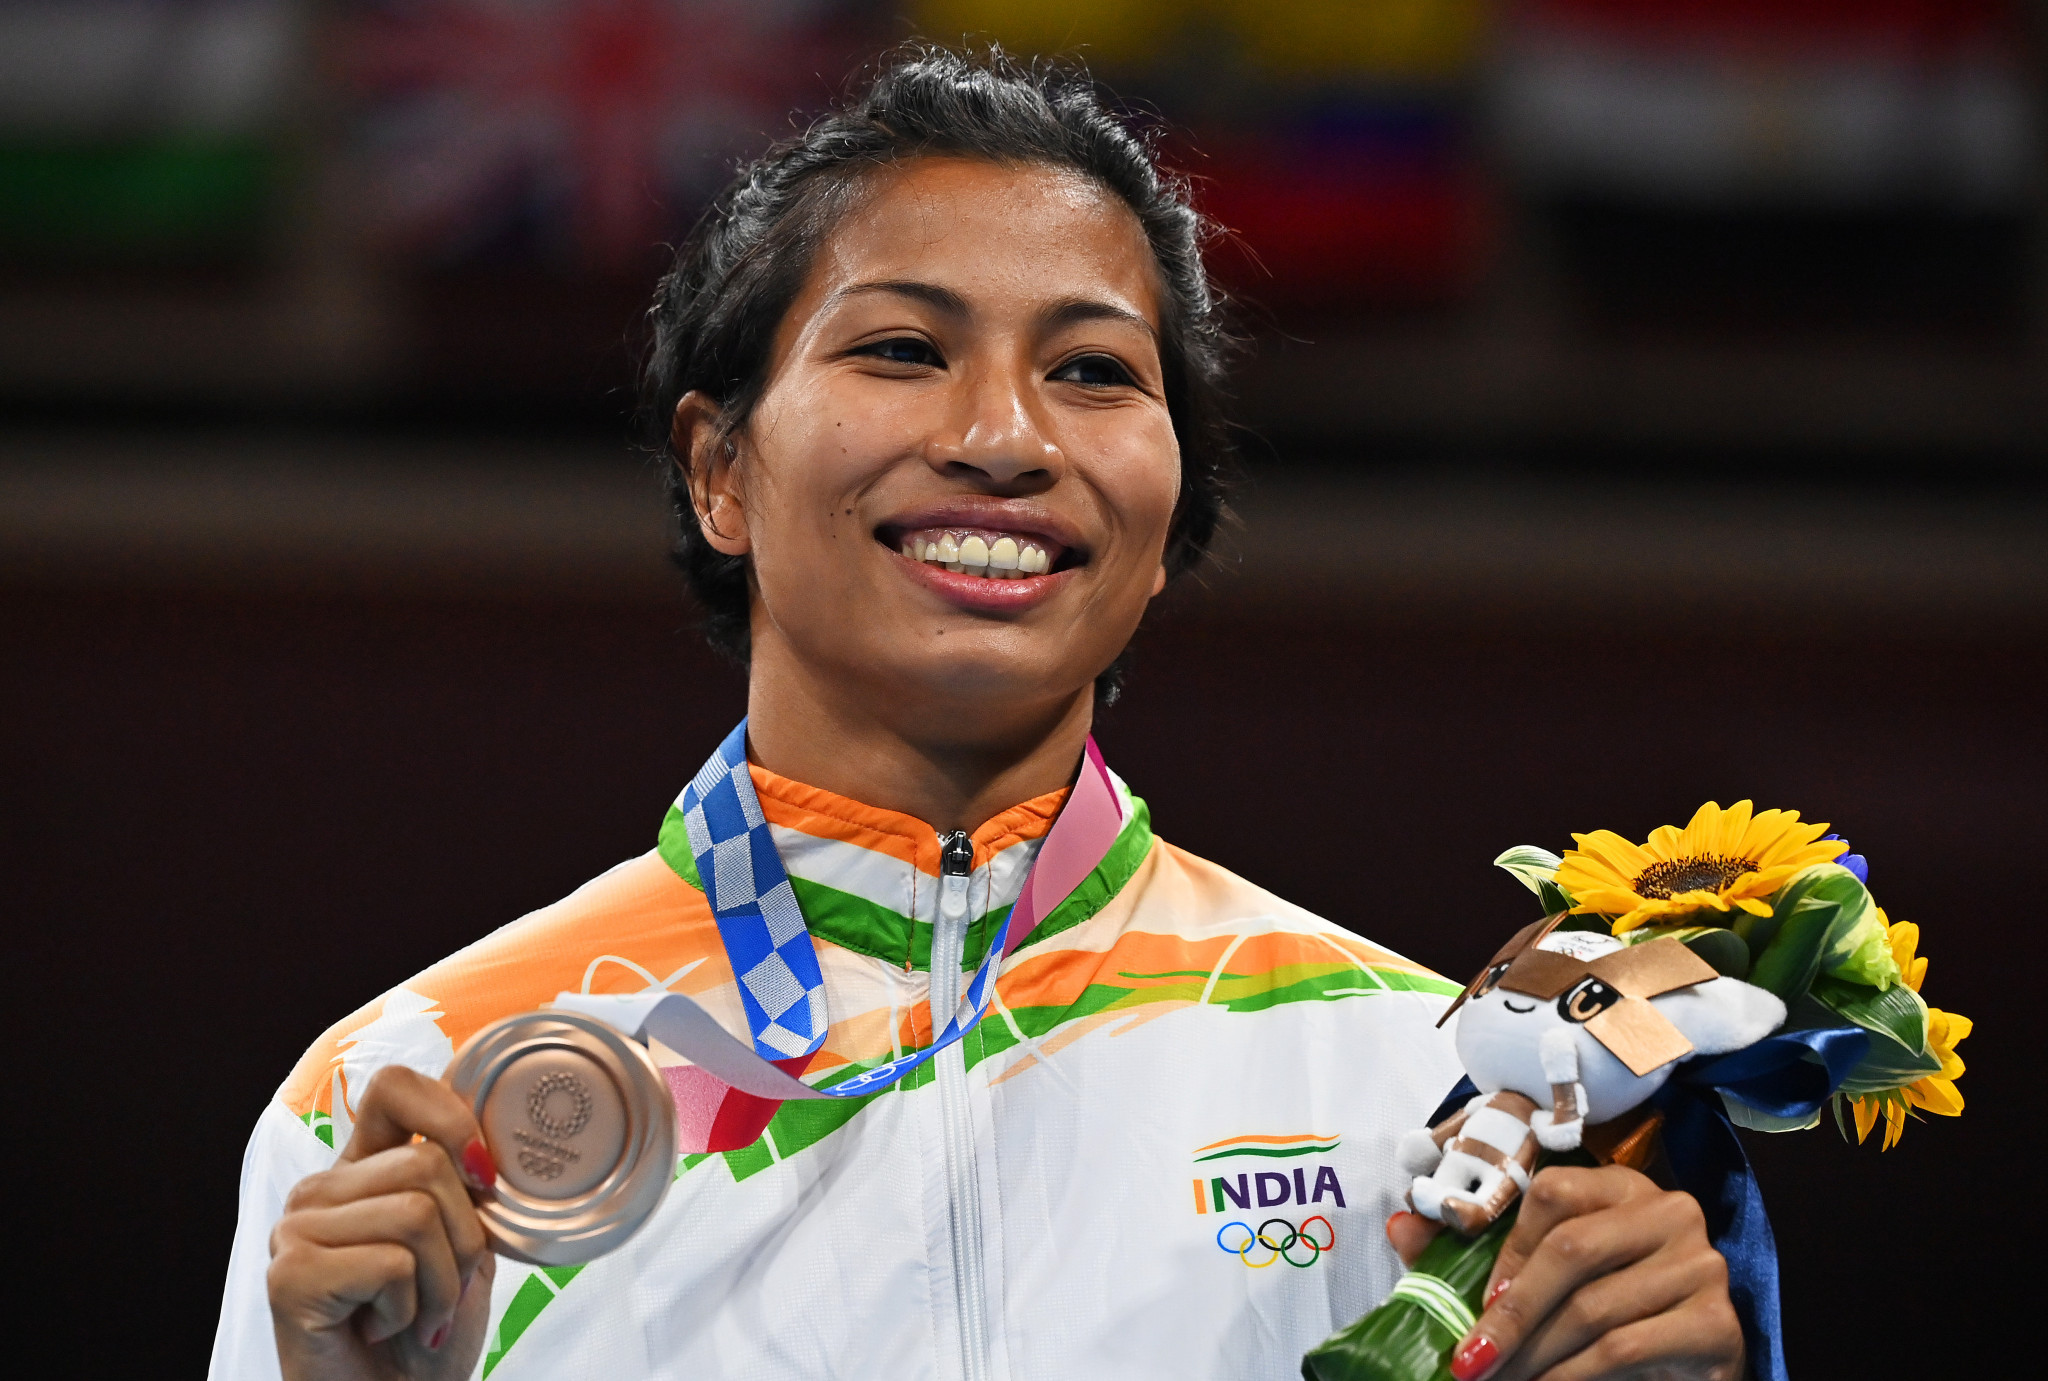 Lovlina Borgohain won India's first Olympic medal in boxing in nine years at Tokyo 2020 ©Getty Images